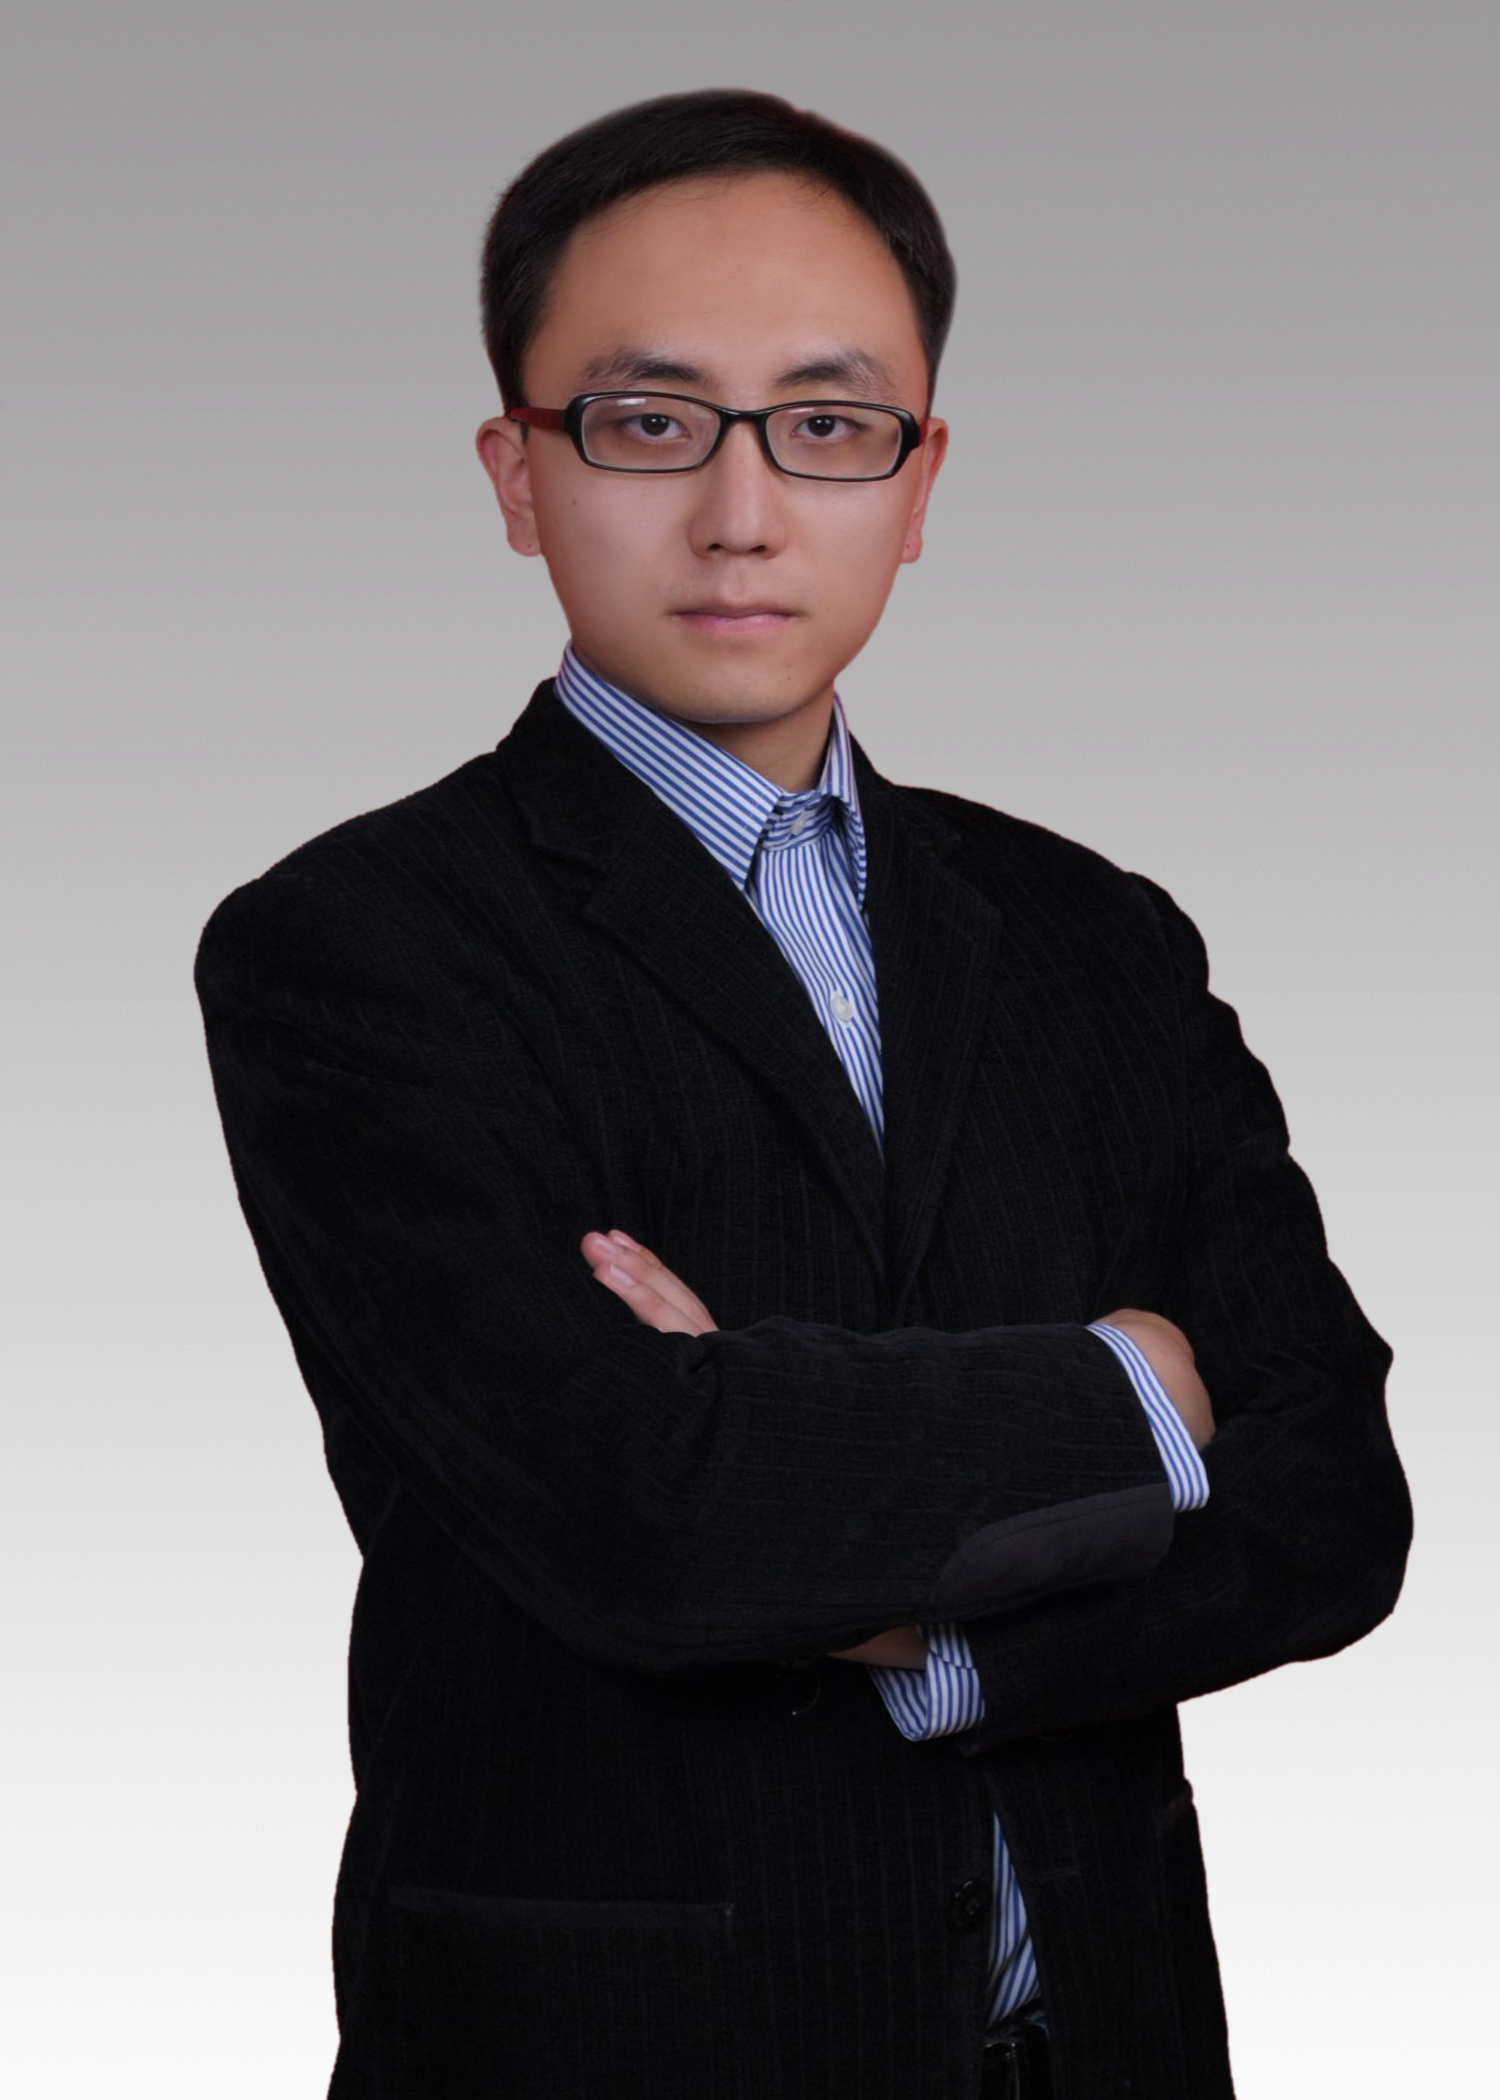 Congratulations to our Phd Alum, Yang Kang, on being awarded the 2023 Applied Probability Society Best Publication Award.